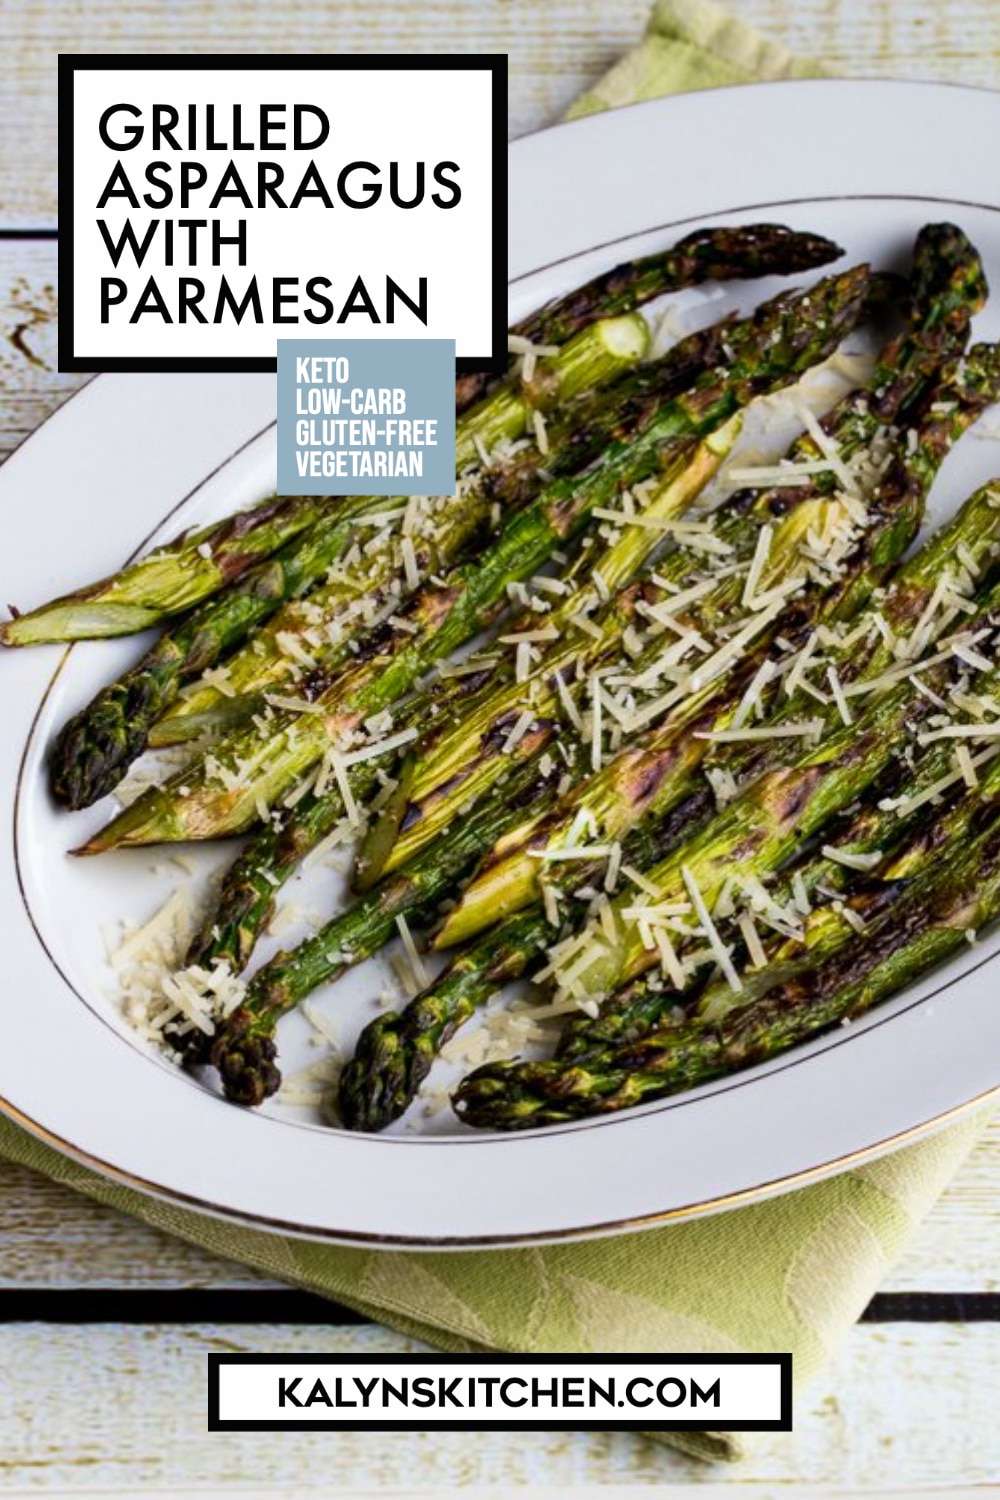 Pinterest image of Grilled Asparagus with Parmesan